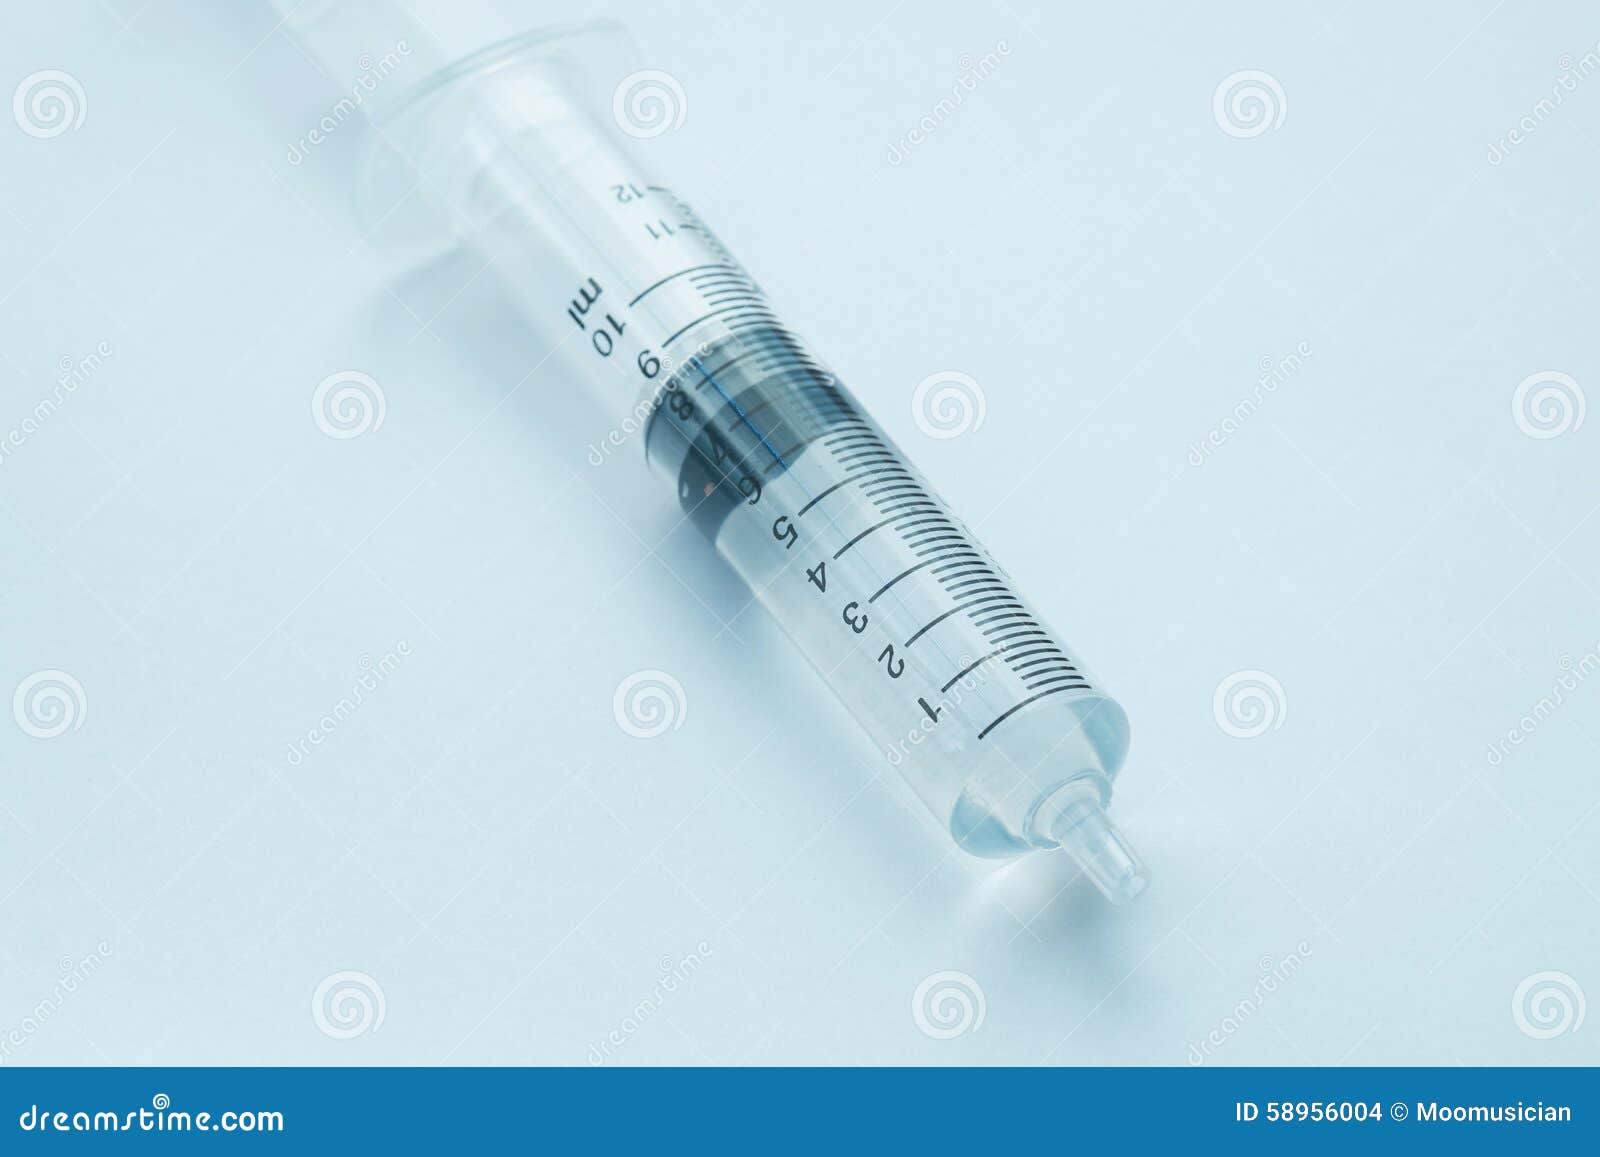 Syringe with clear liquid stock photo. Image of closeup - 58956004